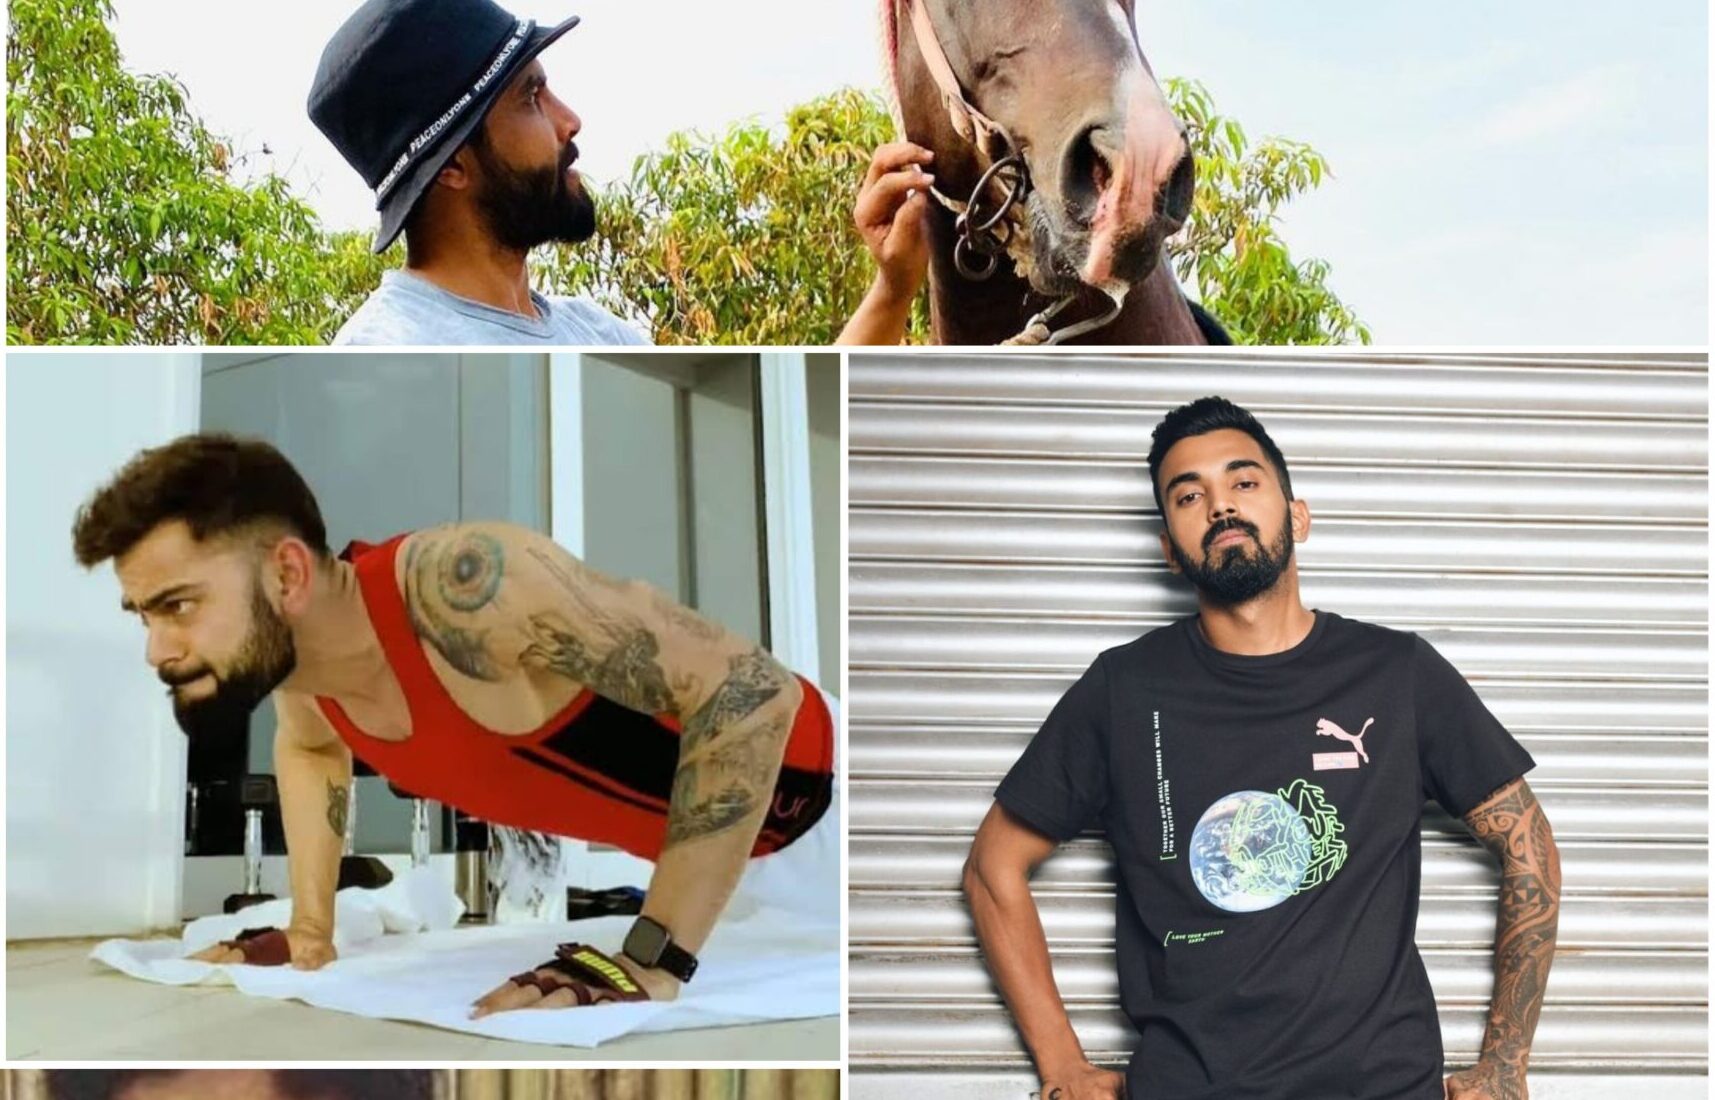 Tattoos काढण्याचा विचार करताय? IPL मधील 6 क्रिकेटर्सचा तोरा एकदा बघाच! |  Indian Cricketers Whose Awesome Tattoos Are Making Us Want Our Own In  Marathi